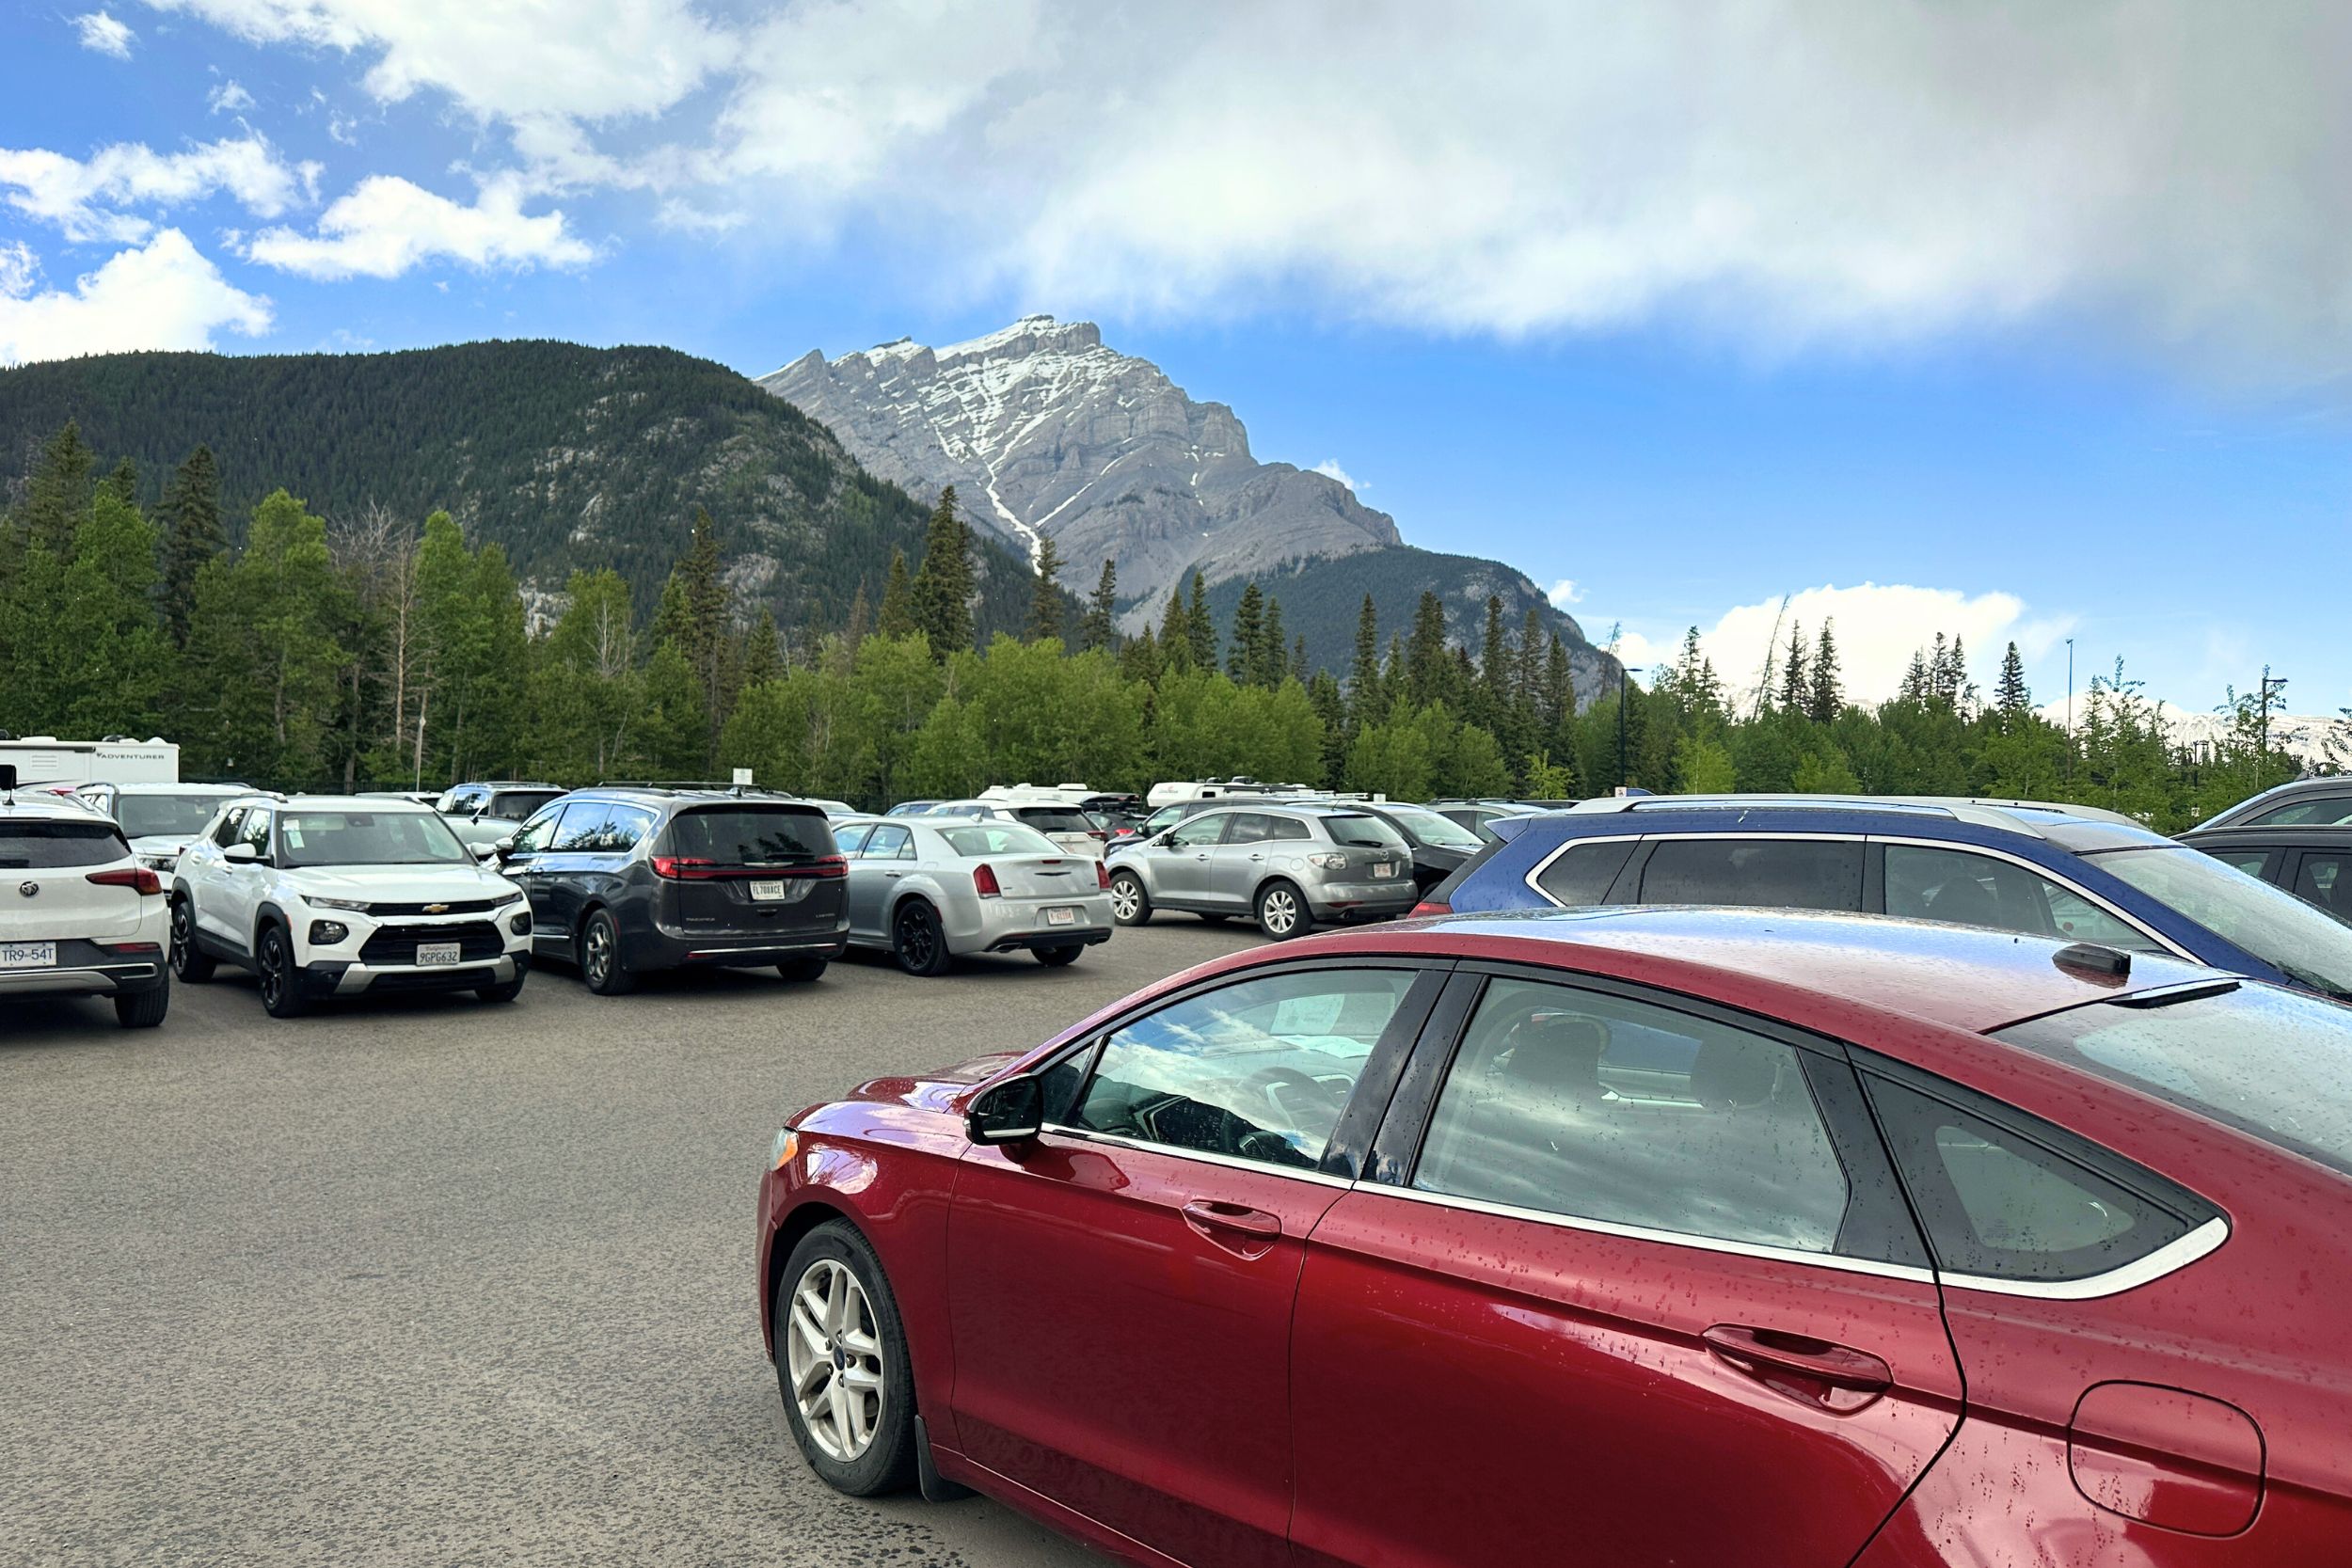 parking at the banff train station